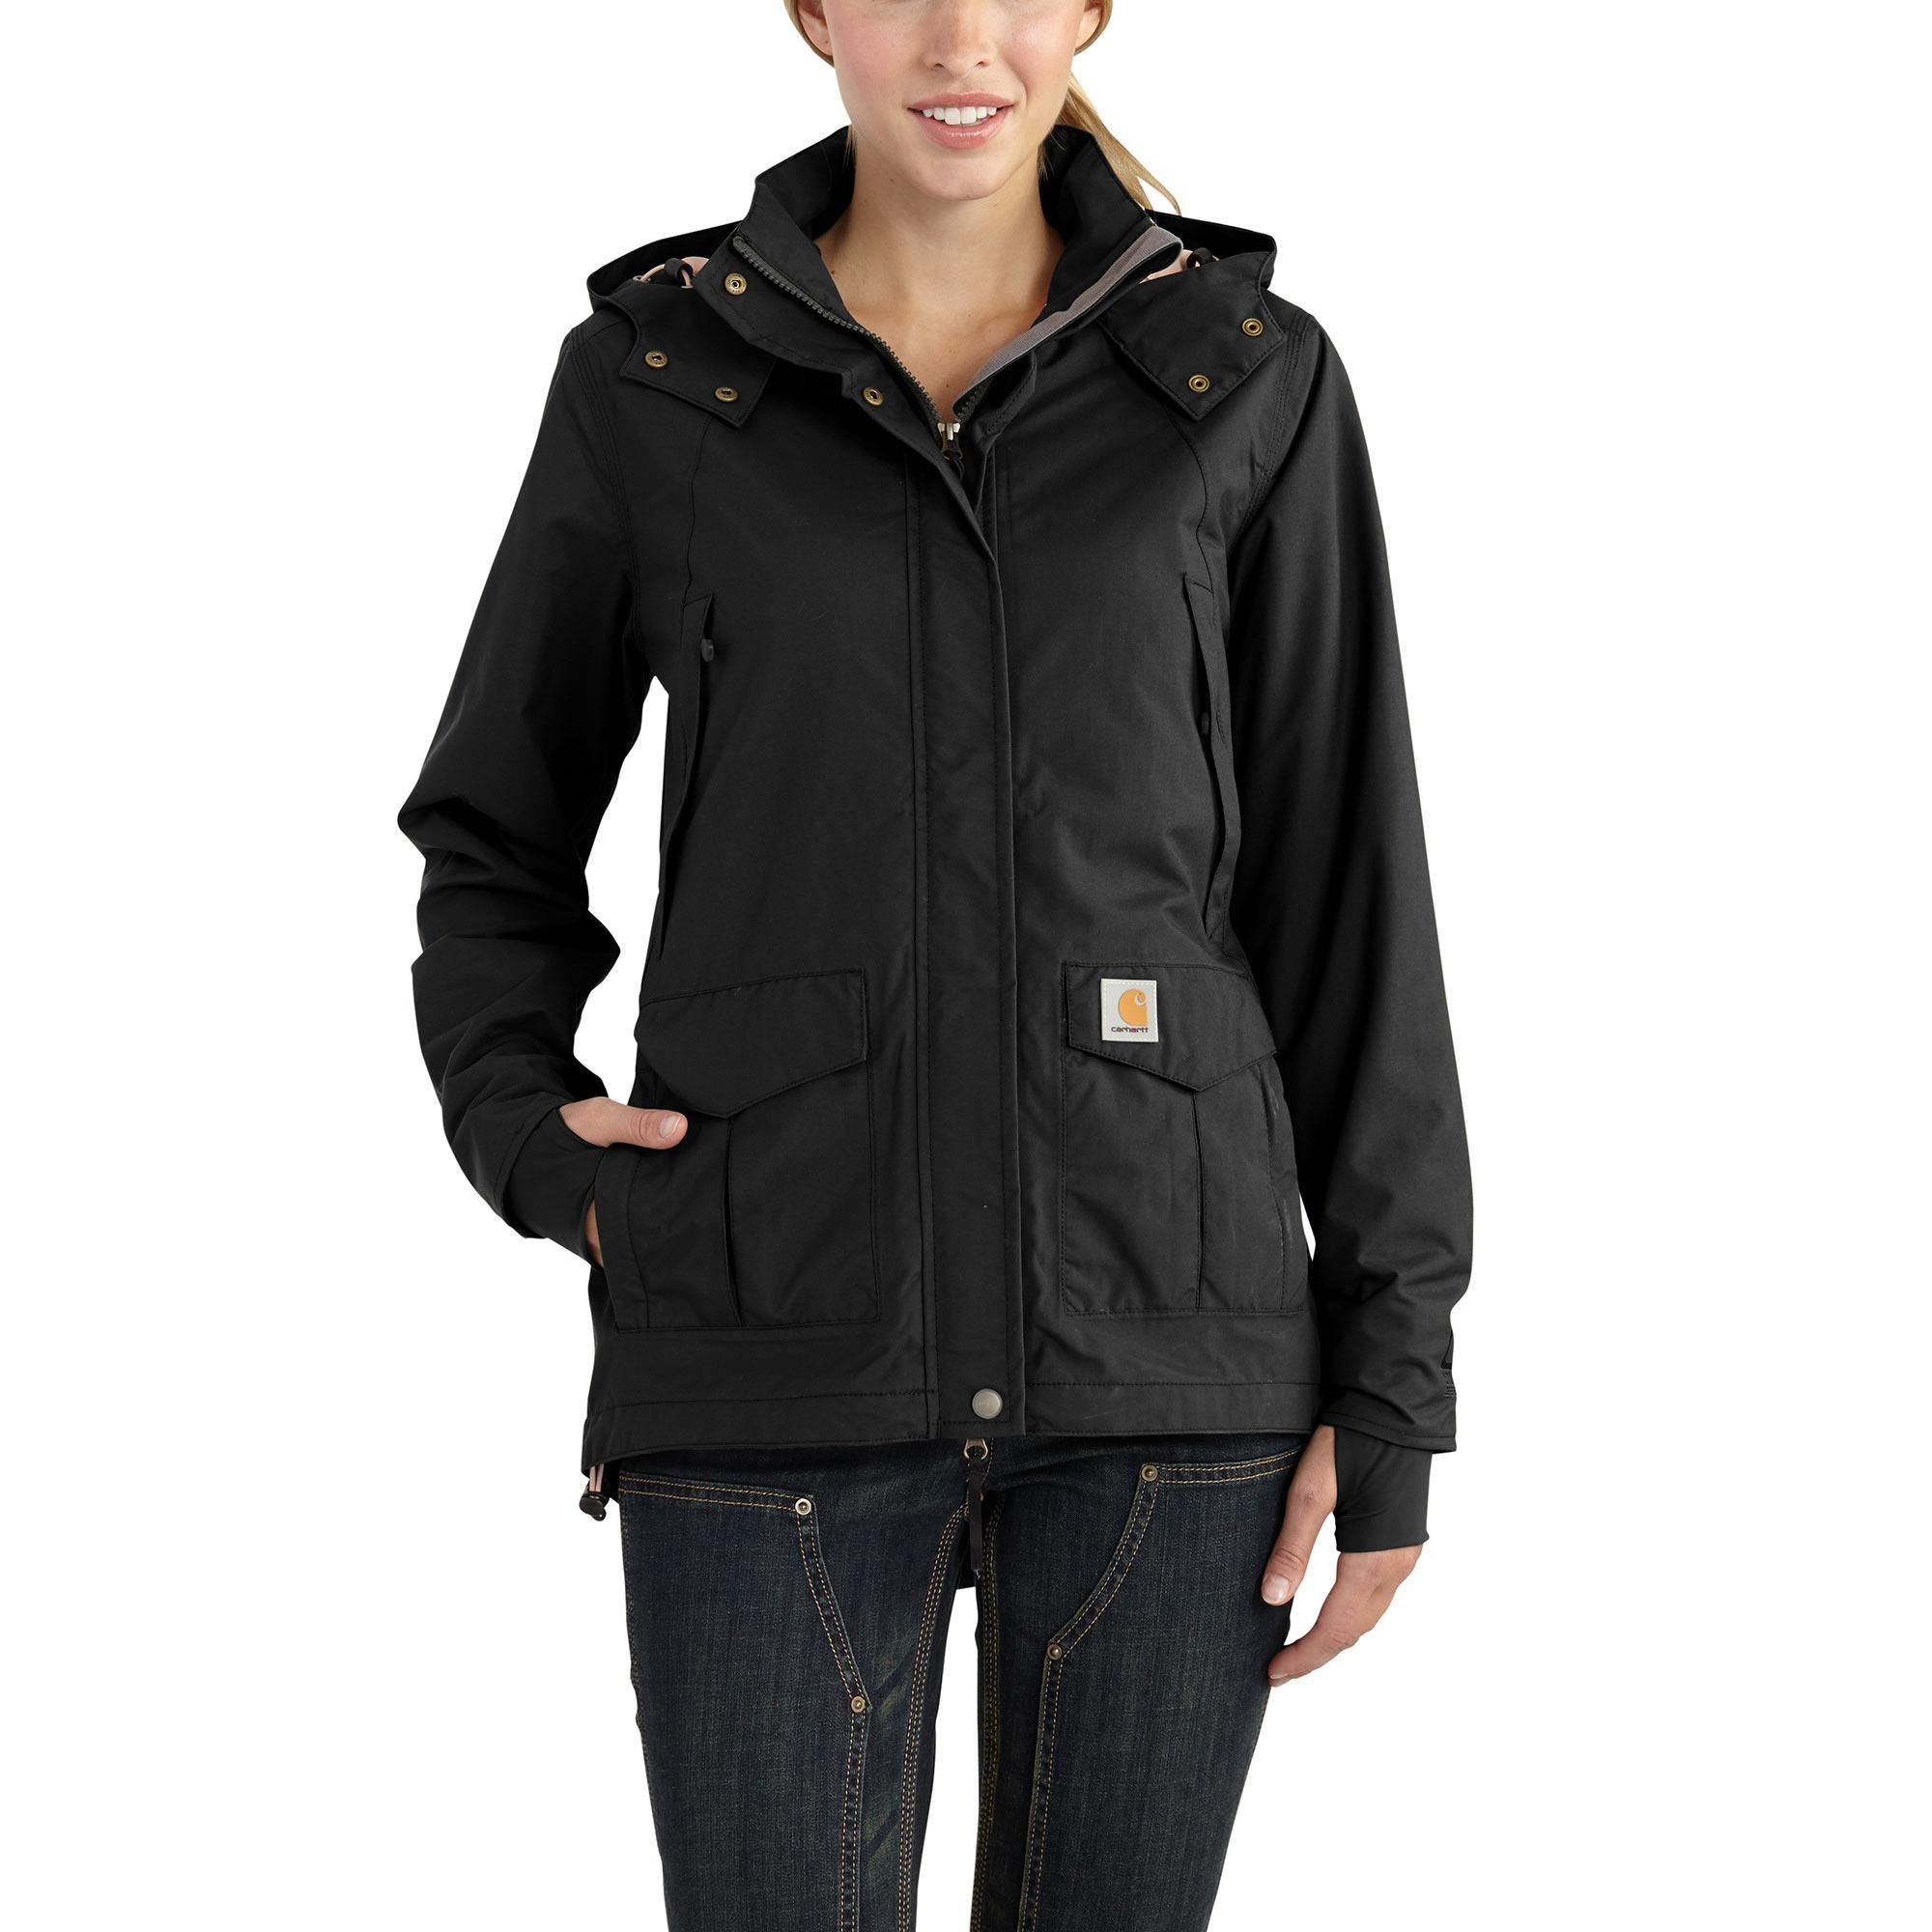 Women's Storm Defender Relaxed Fit Heavyweight Jacket - Black - Purpose-Built / Home of the Trades